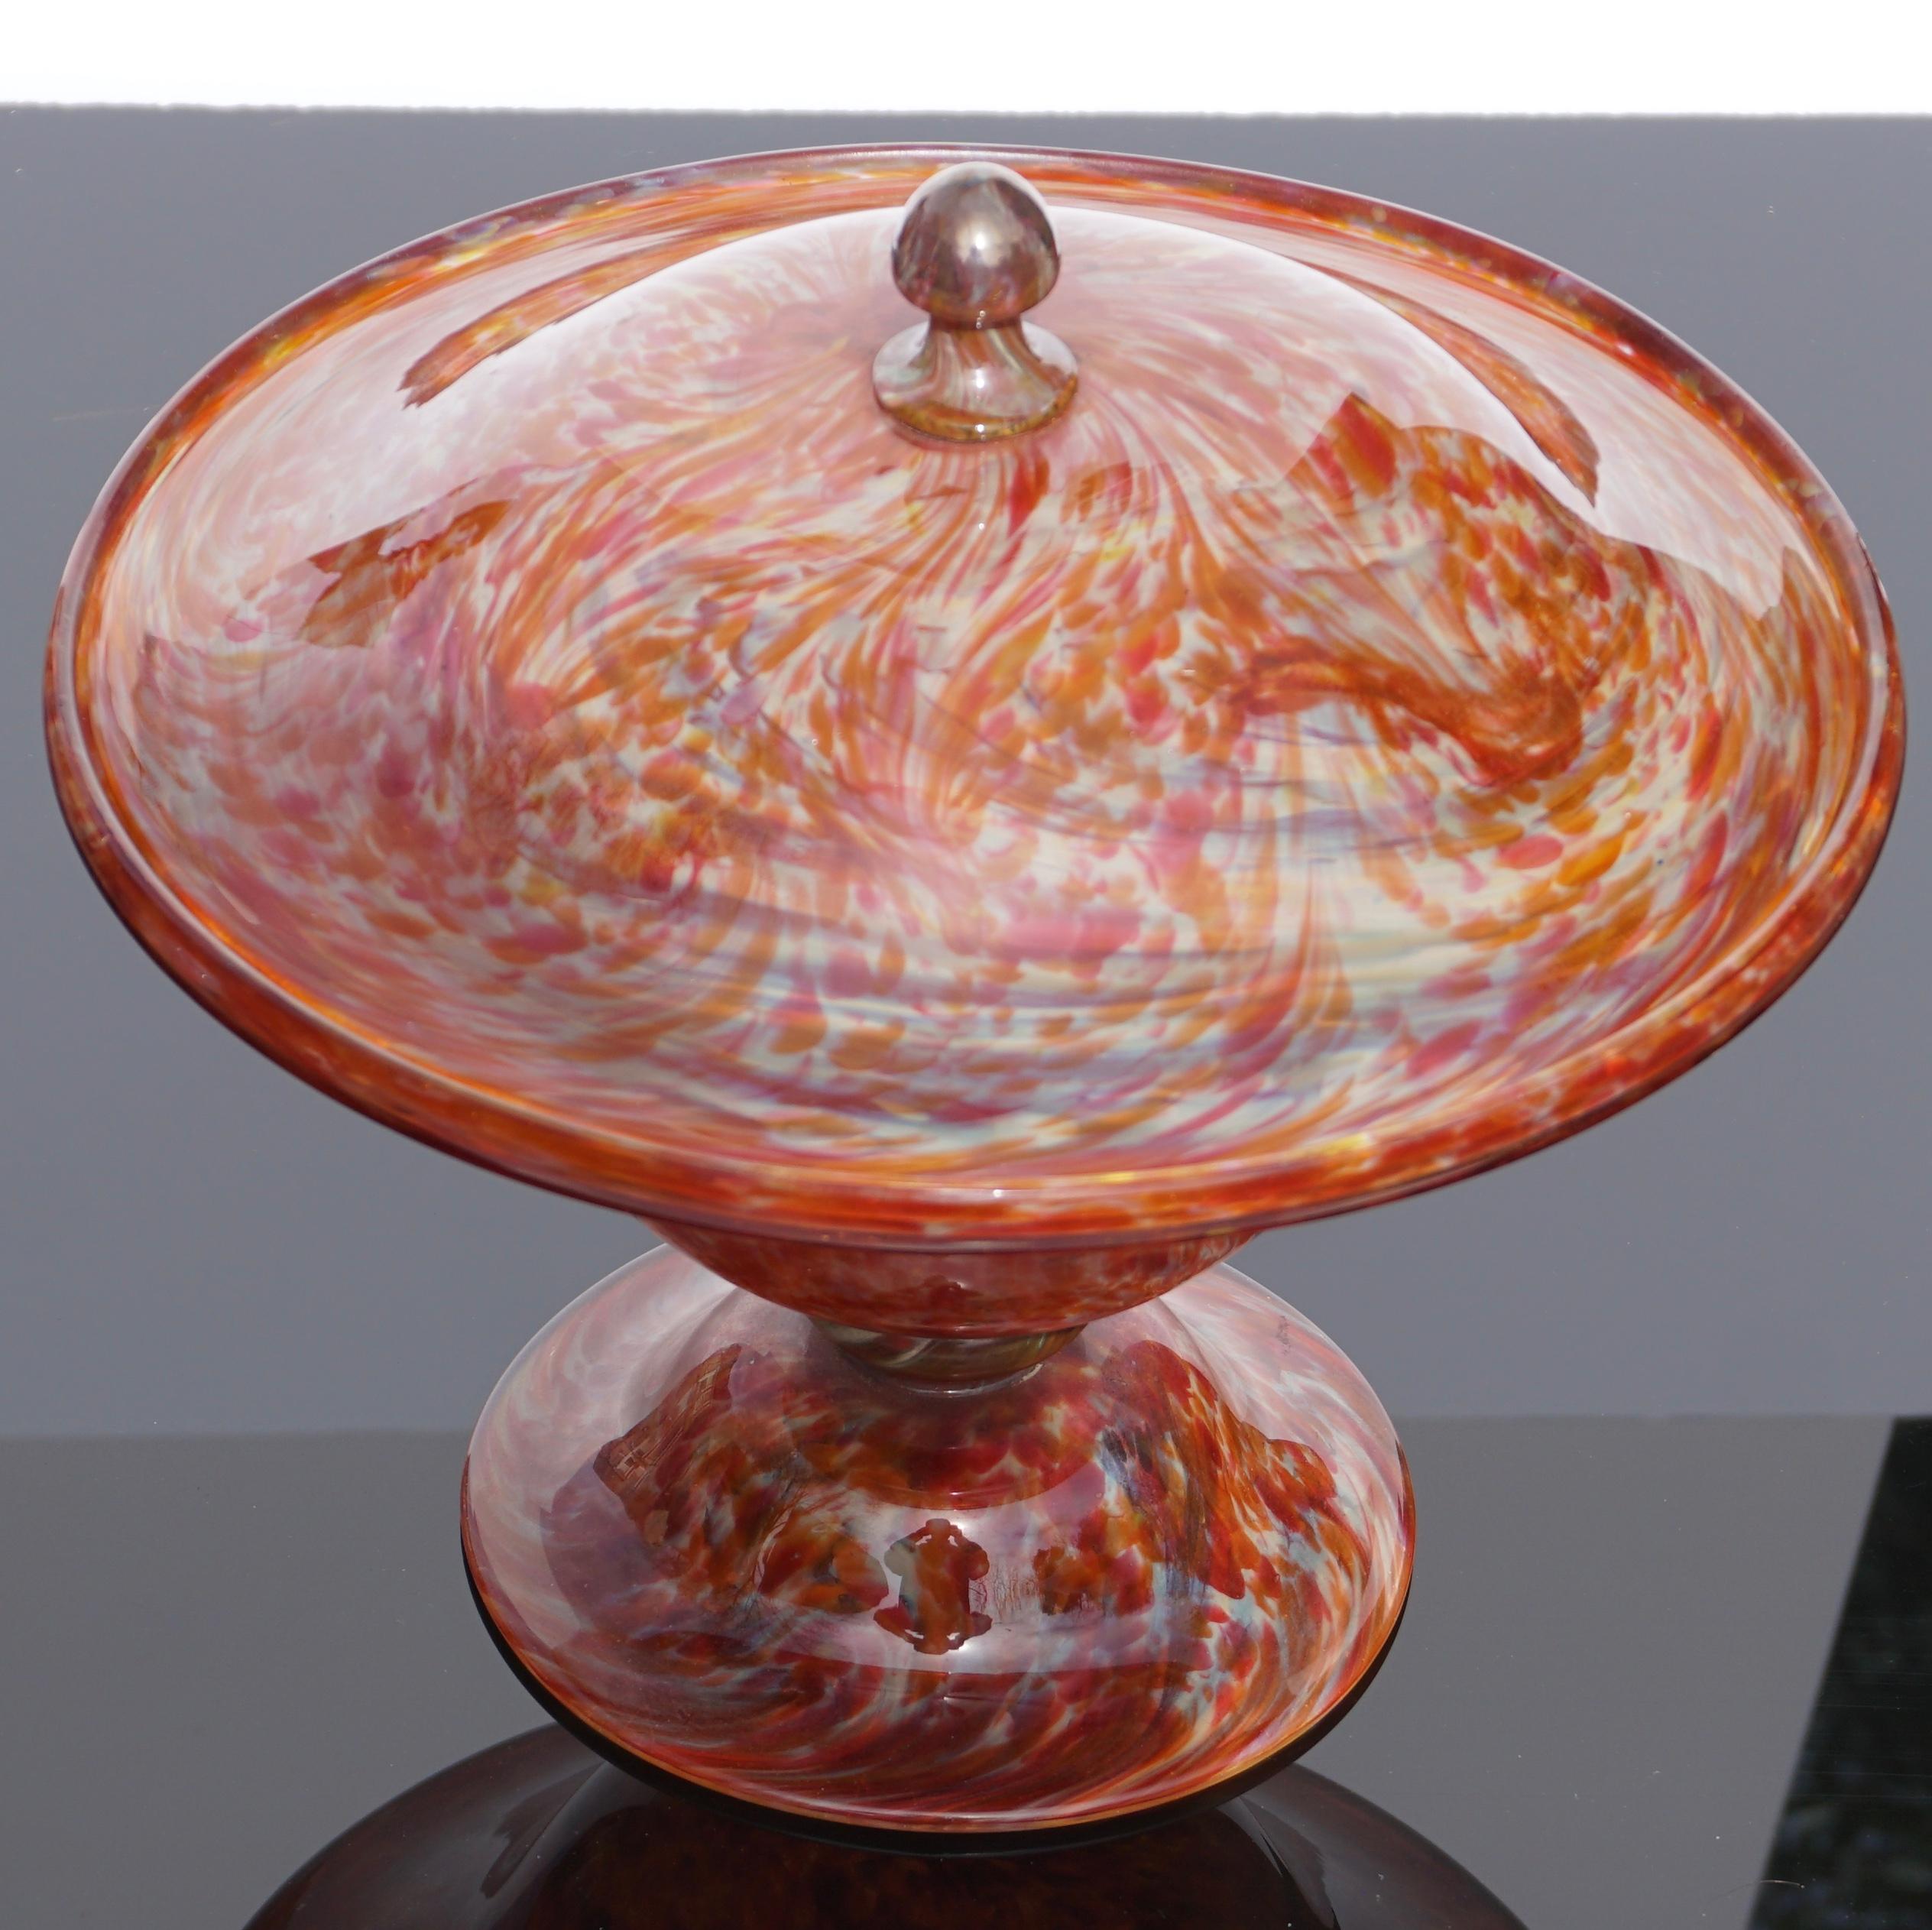 A large French Art Verrier Saint Louis marbled glass lidded bowl compote, circa 1910. Art Nouveau, Art Deco transition art glass pedestal lidded bowl.

Artist: Presumably Paul Nicolas.

Measures: Height 9.75 inches
Diameter 10.25 inches.

Signed: